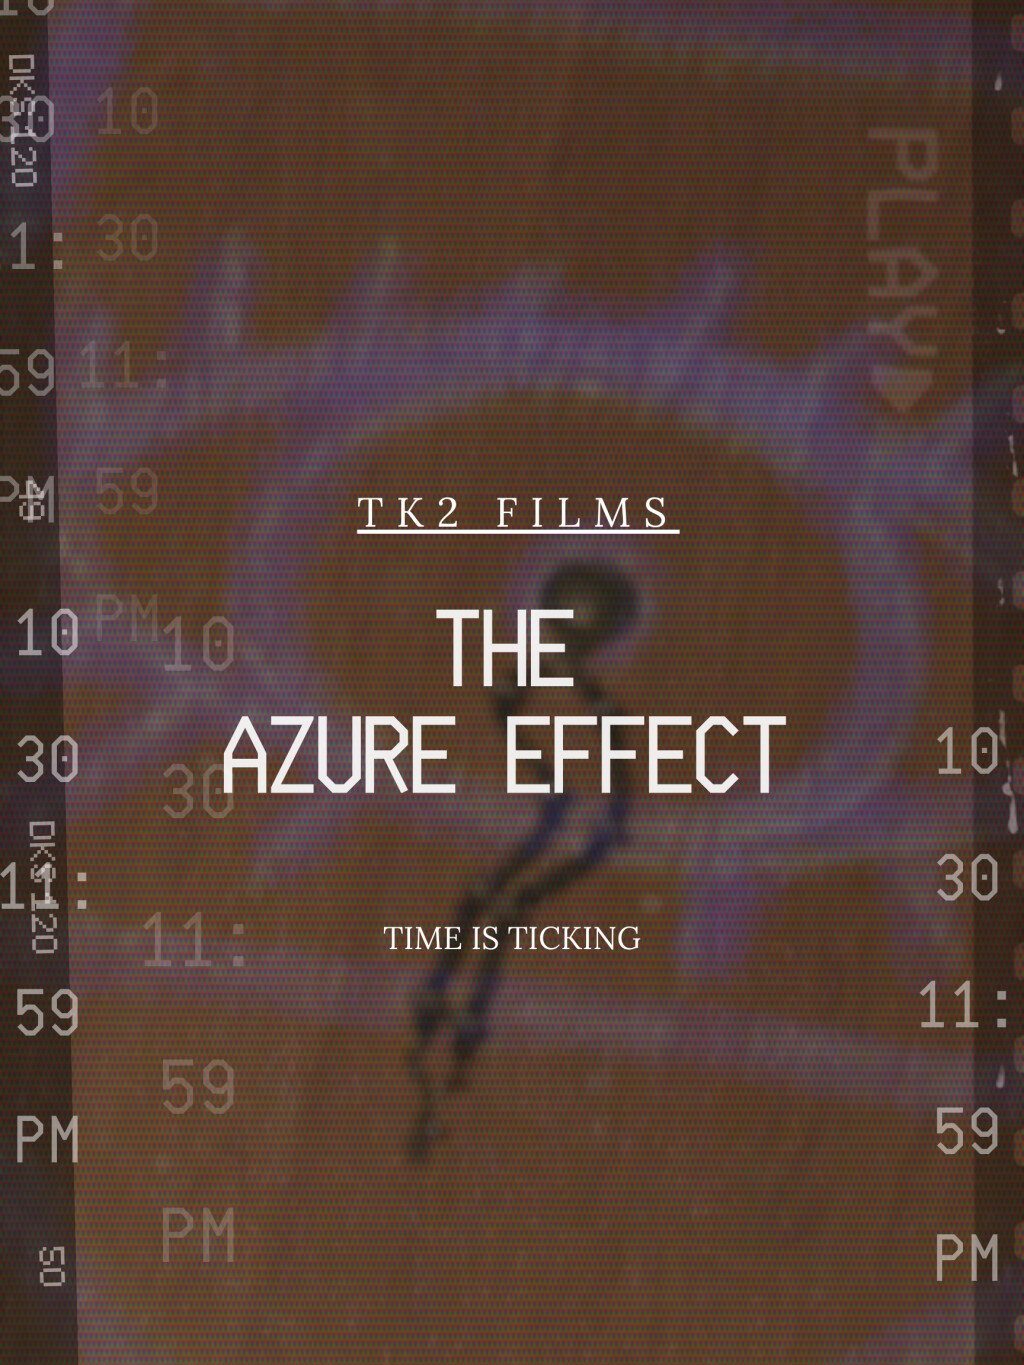 Filmposter for The Azure Effect